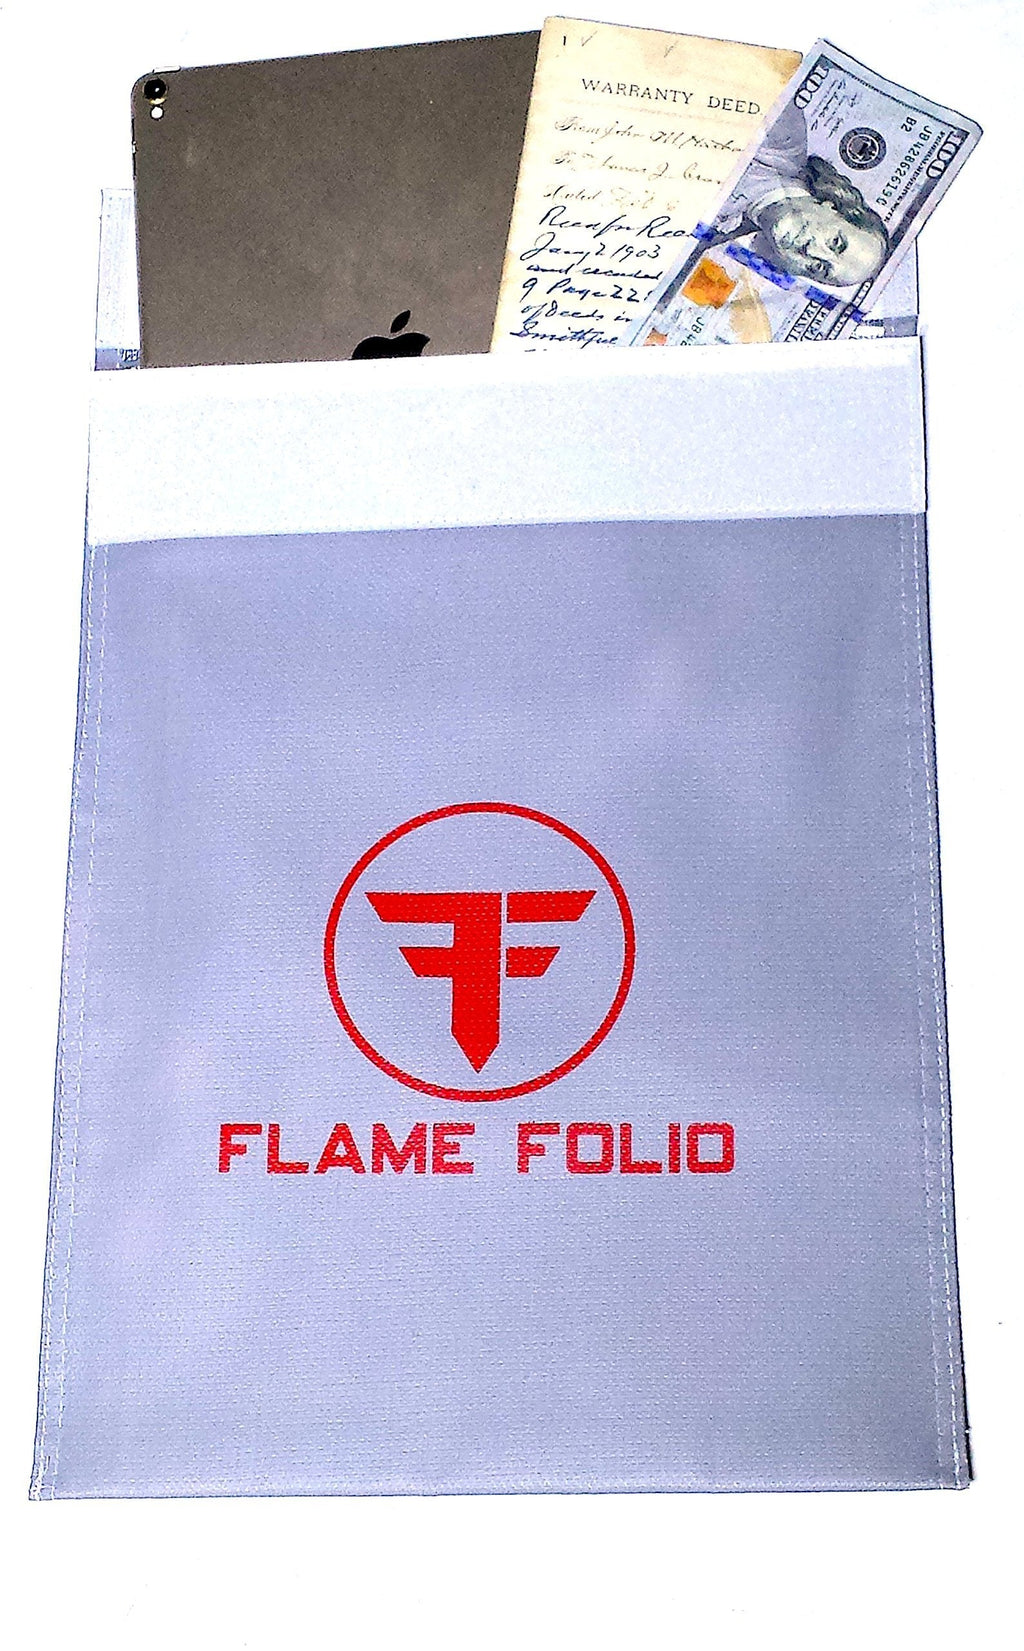 Promethean Flame Folio Fireproof Document Bag 15"x11" Silicone Coated Fire Resistant Money Bag Fireproof Safe Storage for Money, Documents, Deeds, and Passports - NewNest Australia